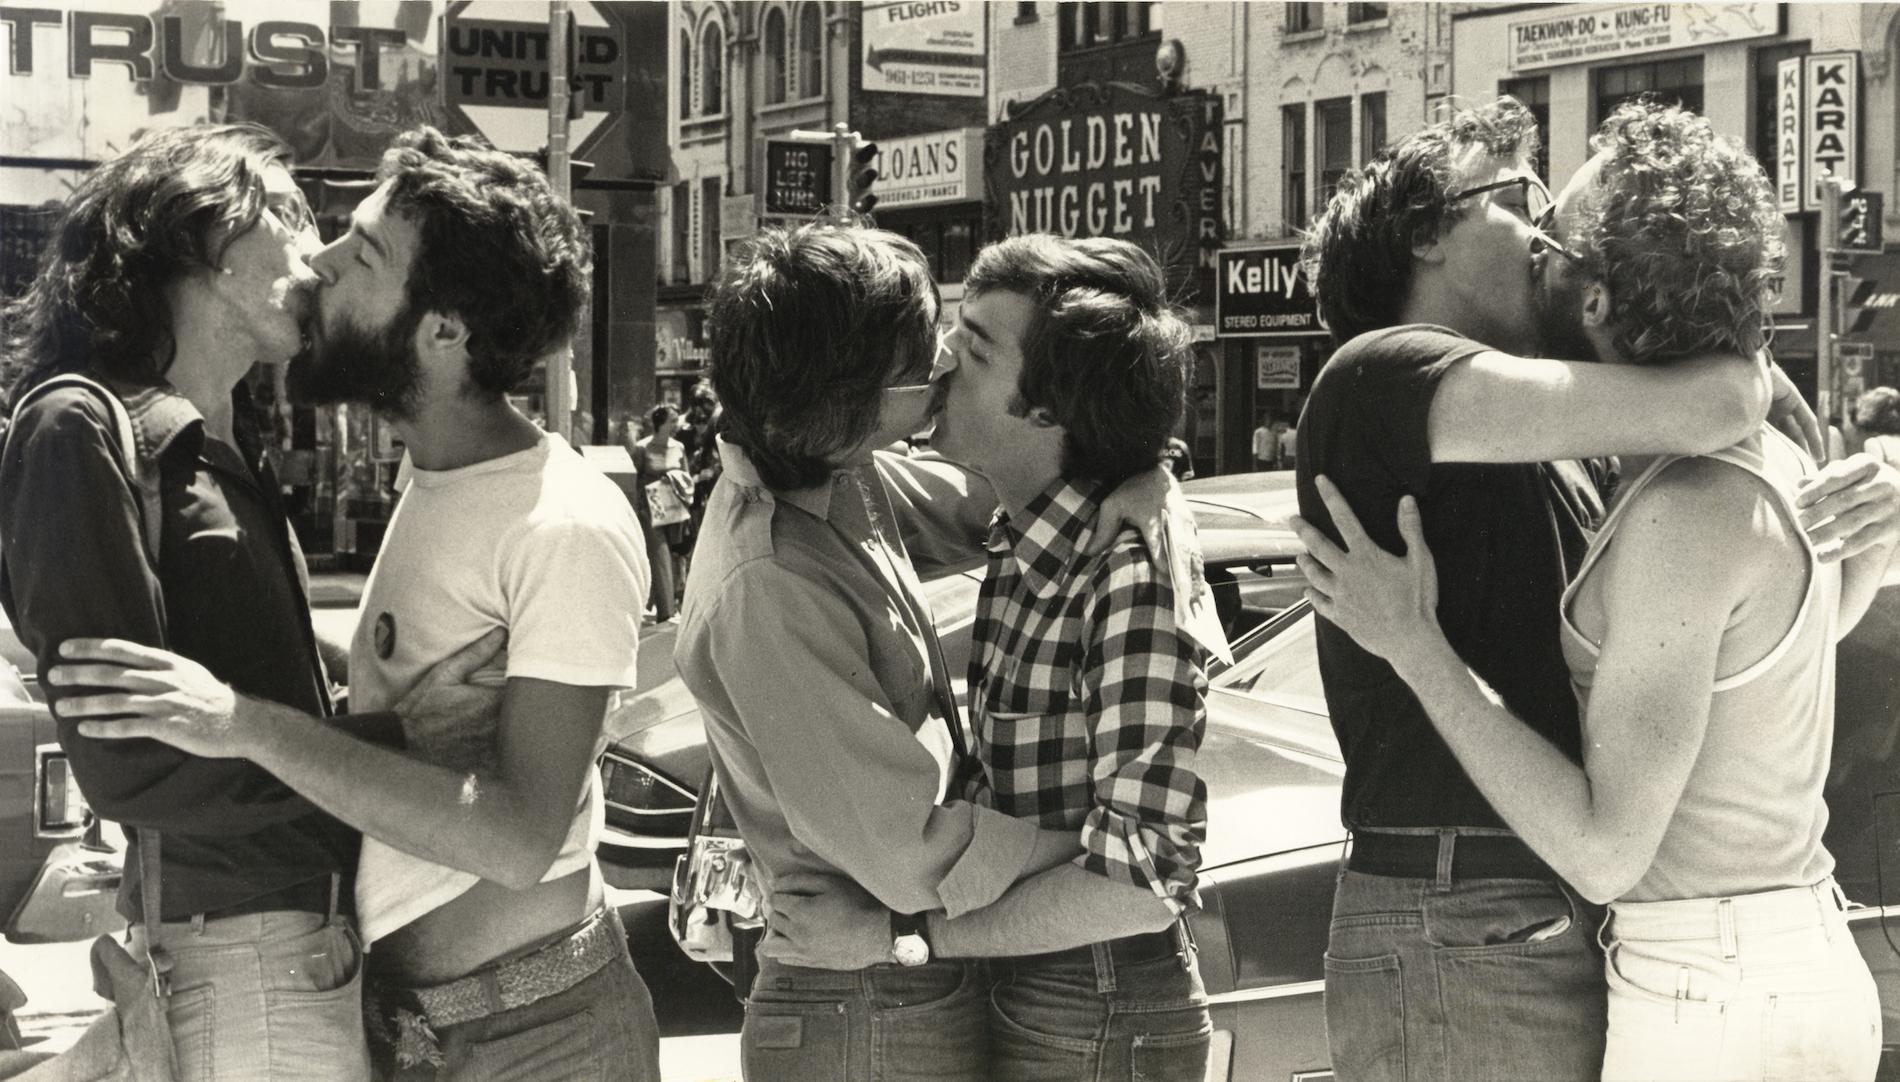 Three same-sex couples kiss in the middle of the street